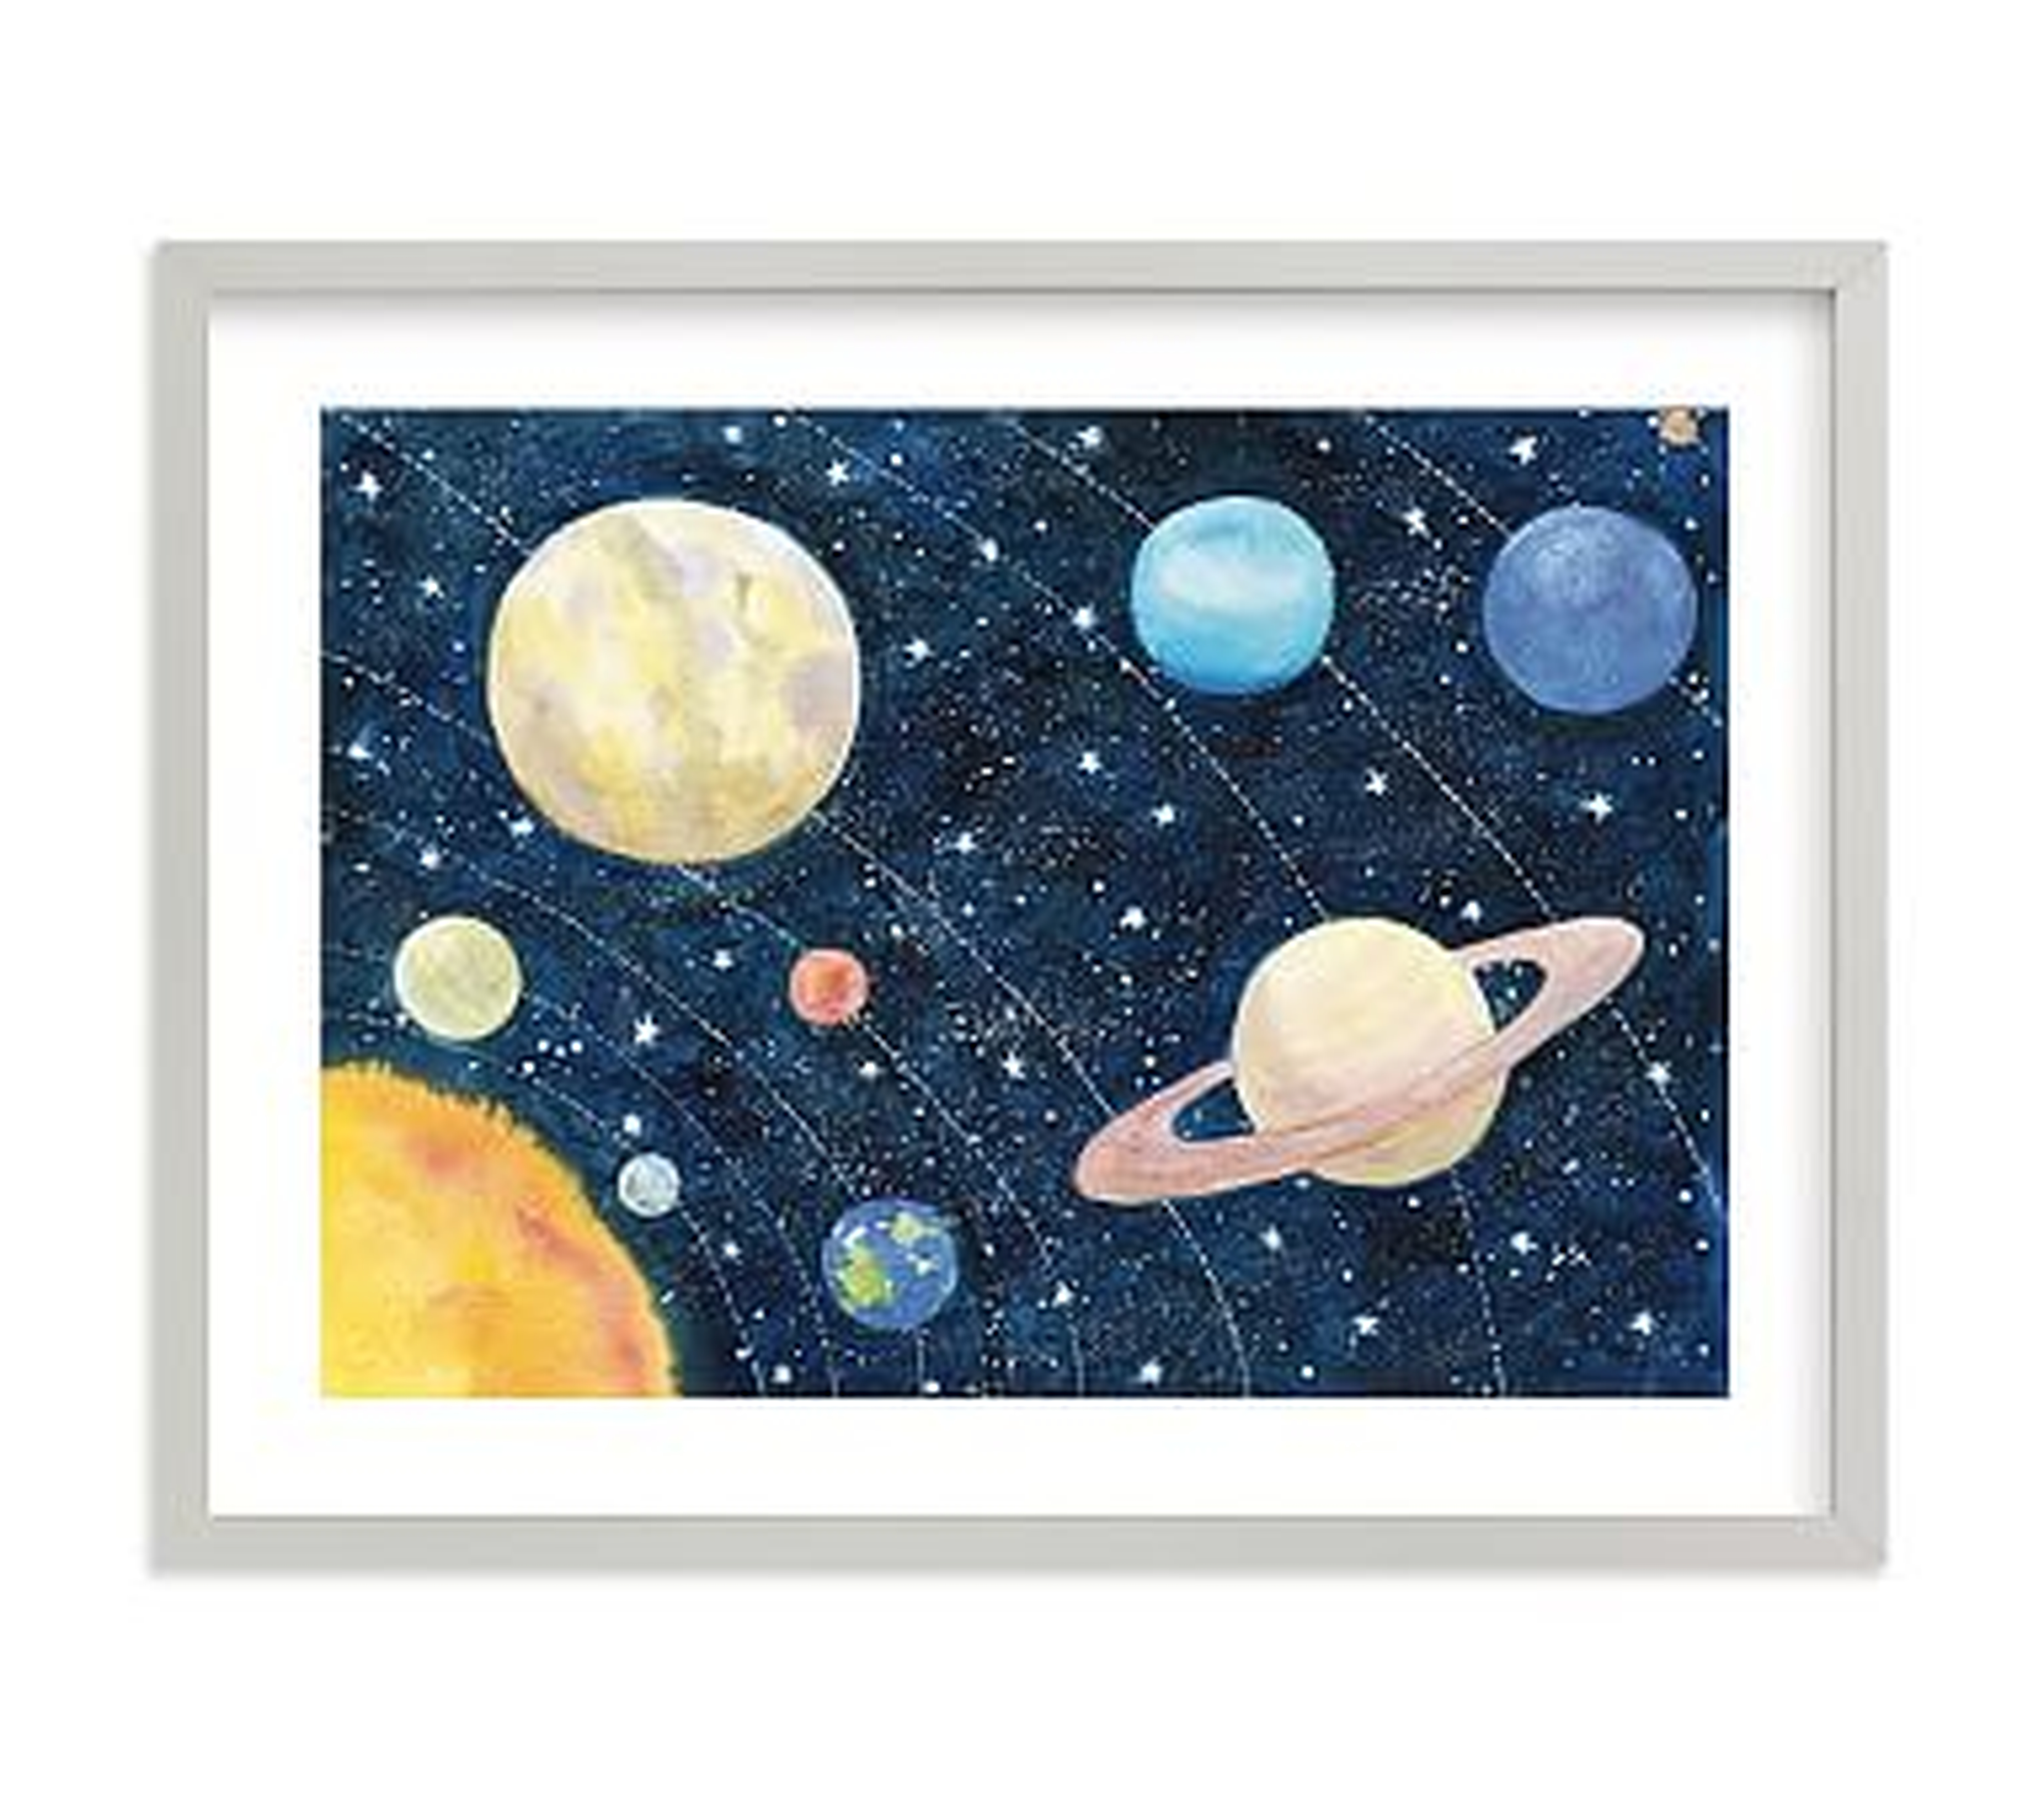 Solar System Wall Art by Minted(R) 14x11, Gray - Pottery Barn Kids